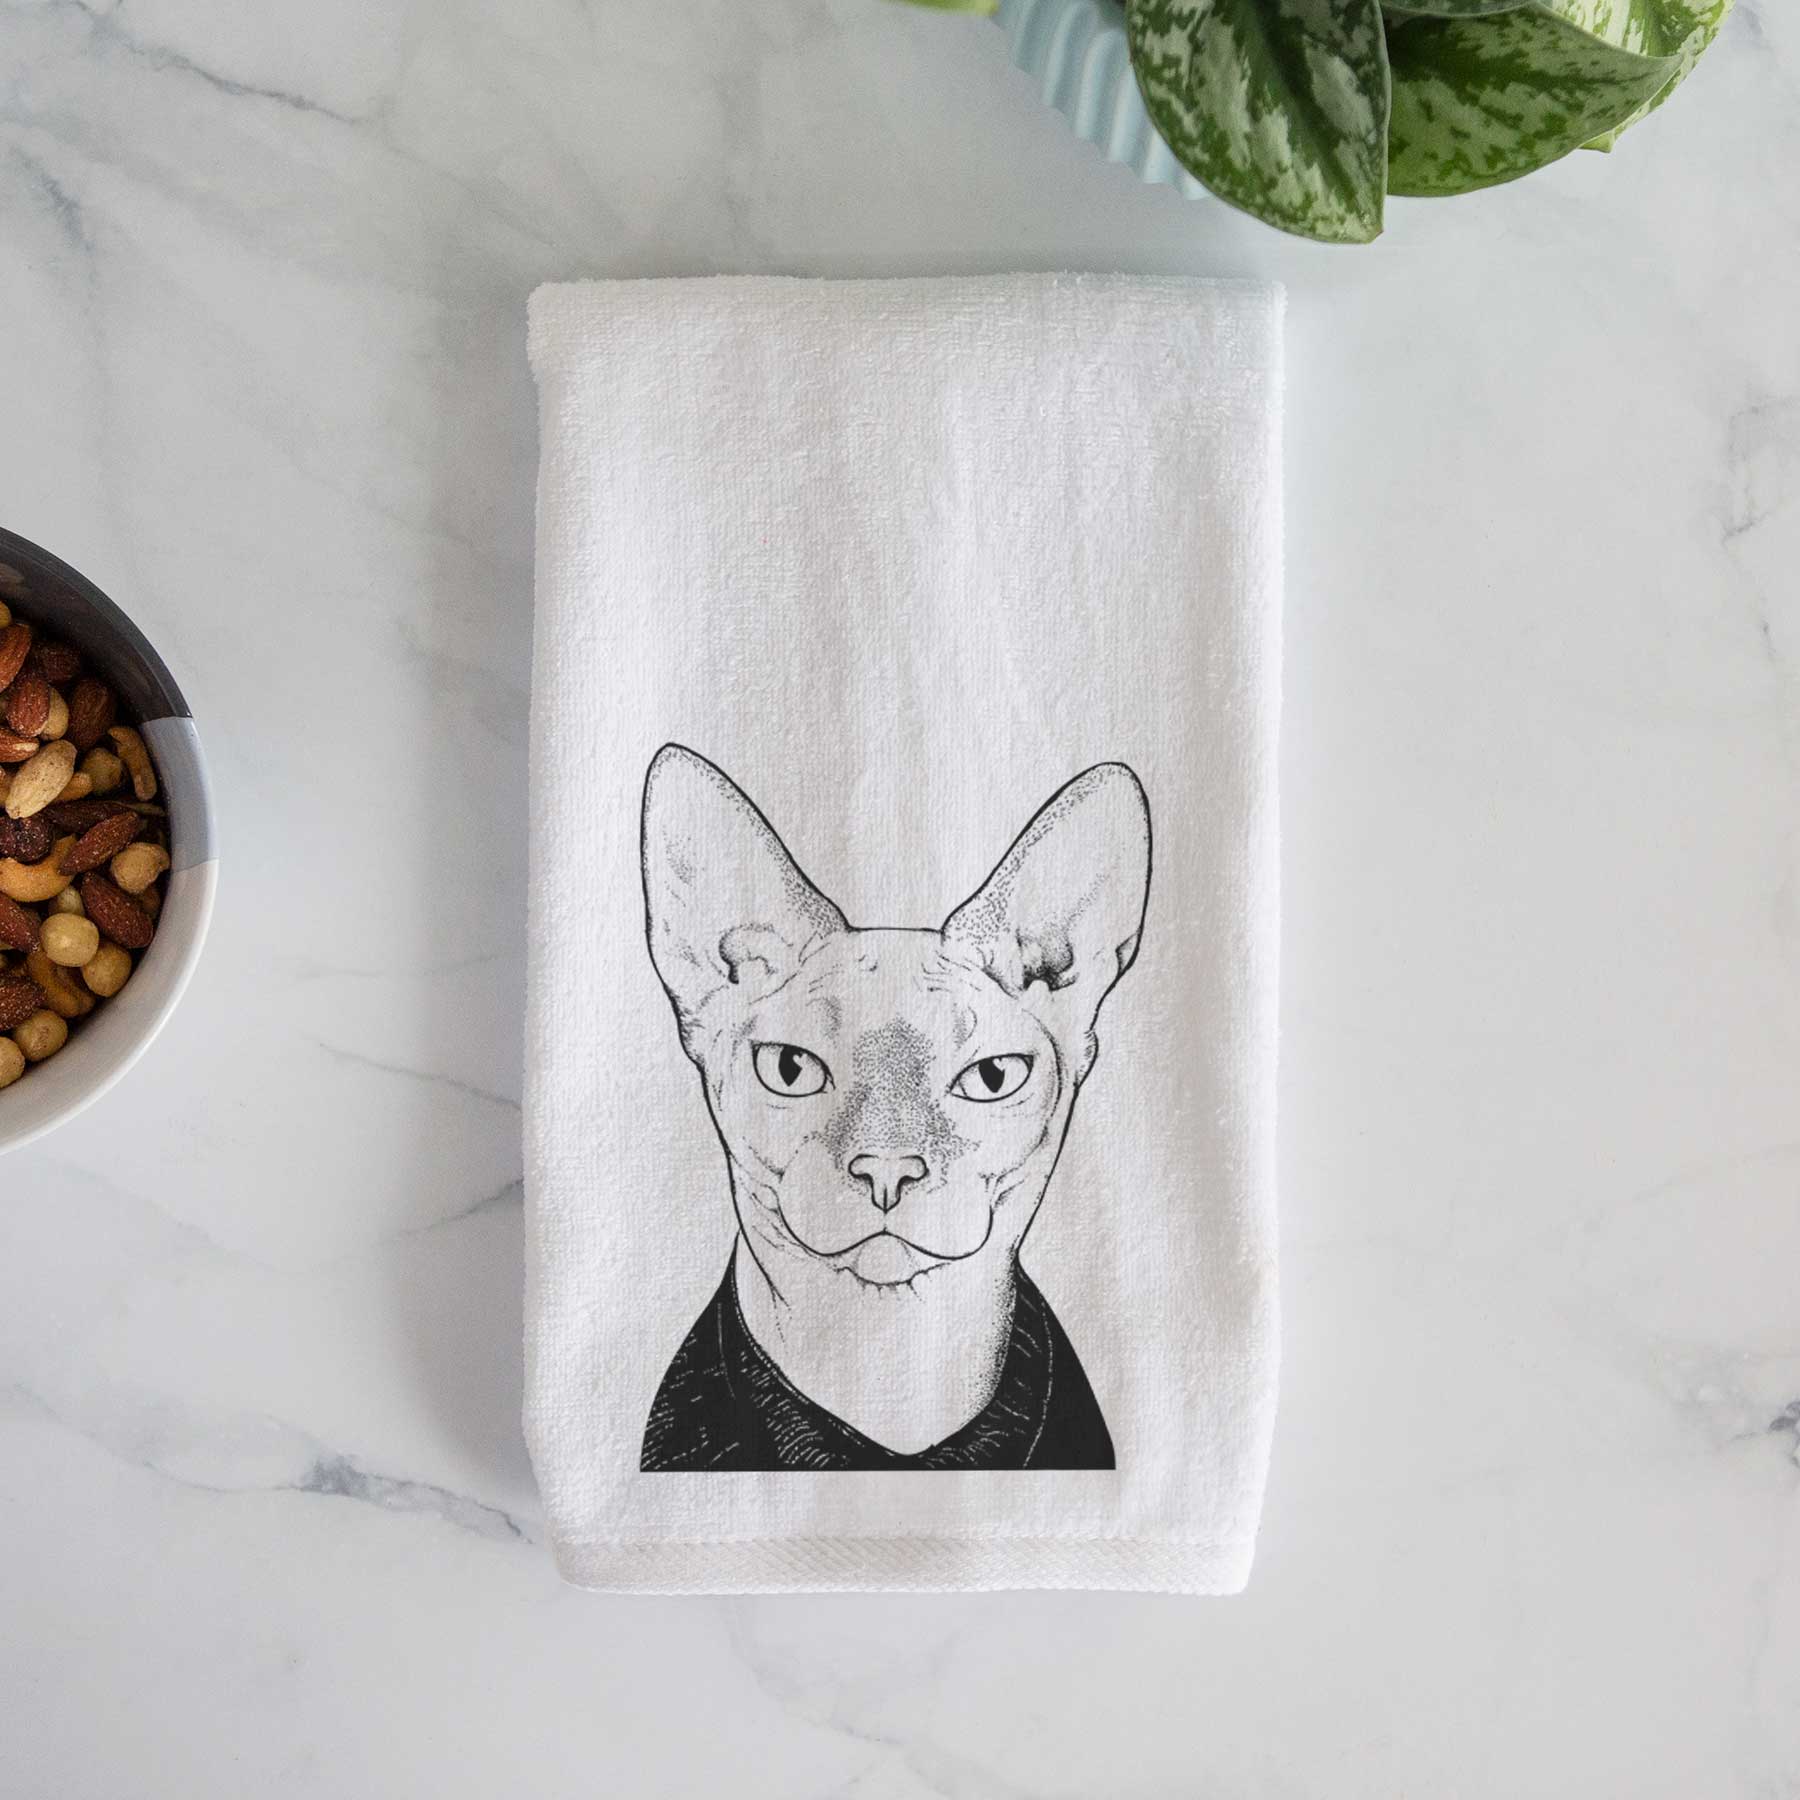 Oliver Watson the Sphynx Cat Hand Towel